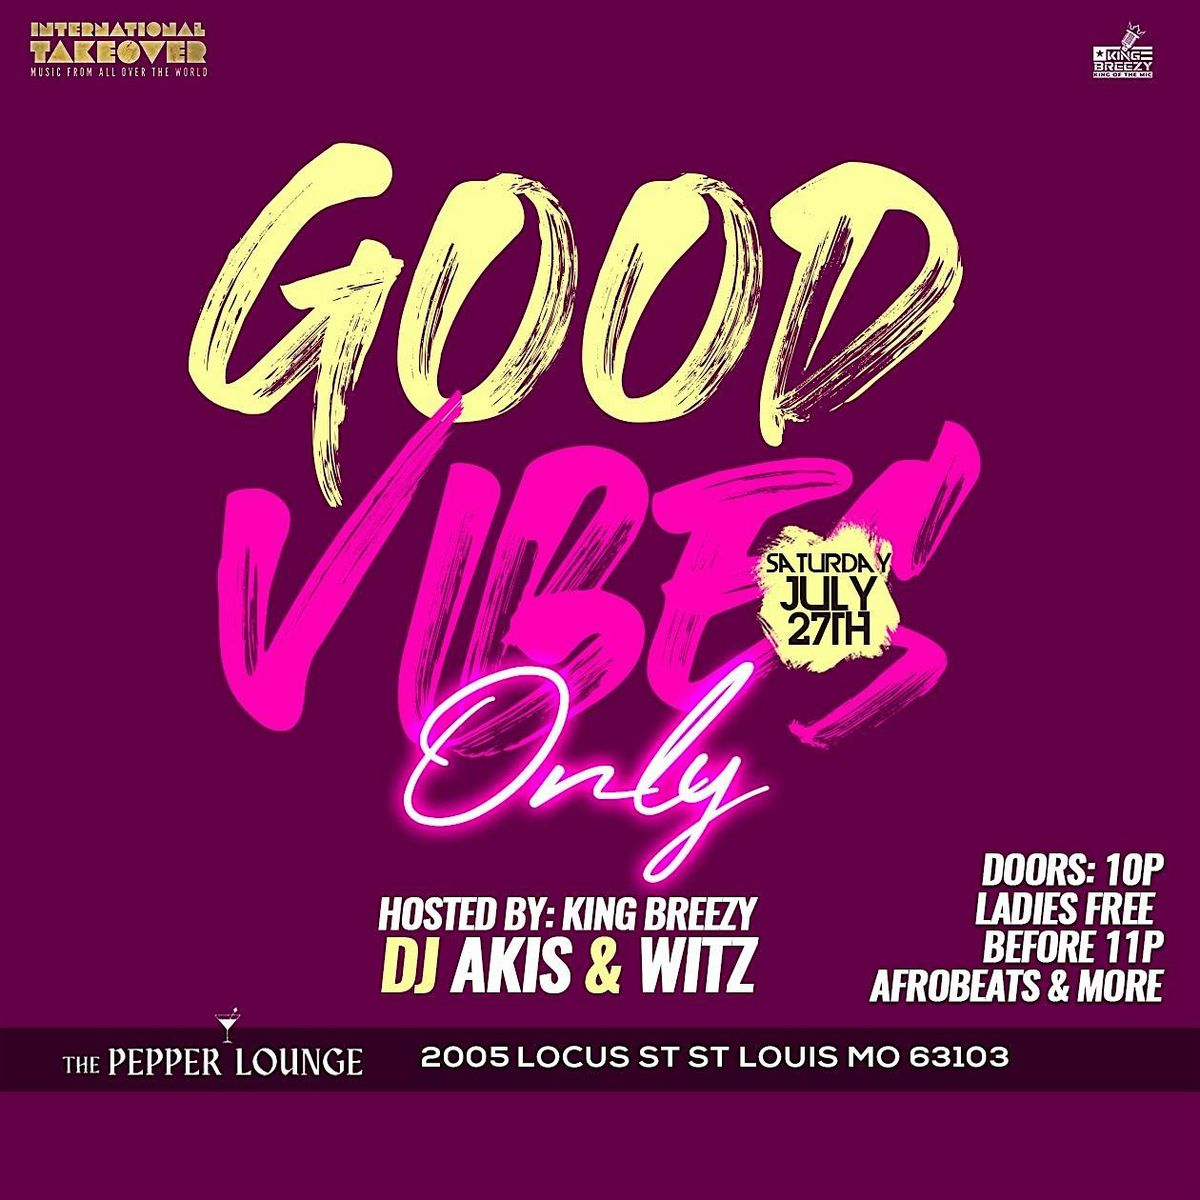 INTERNATIONALTAKEOVER  GOOD VIBES ONLY PARTY